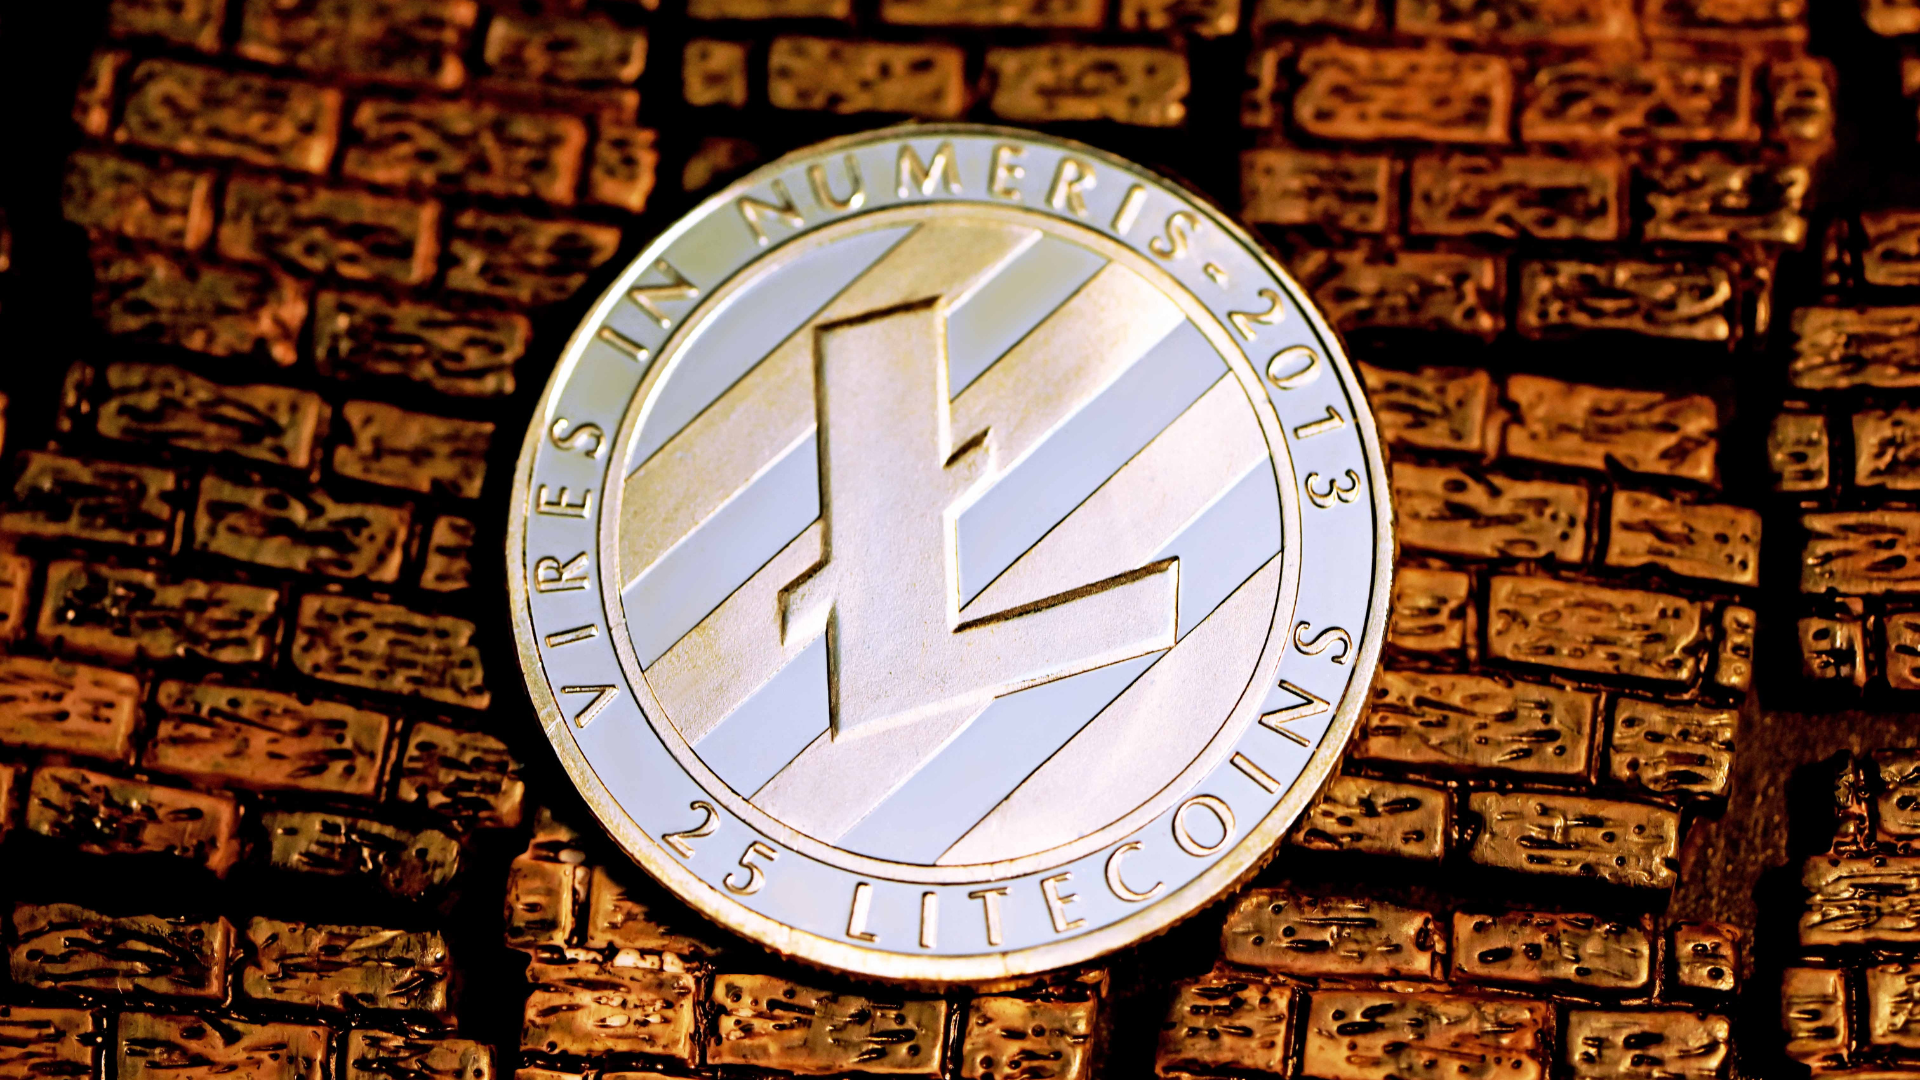 Litecoin Price Prediction: As LTC Coin Tumbles, The Experts Turn To This Pumping Presale Crypto